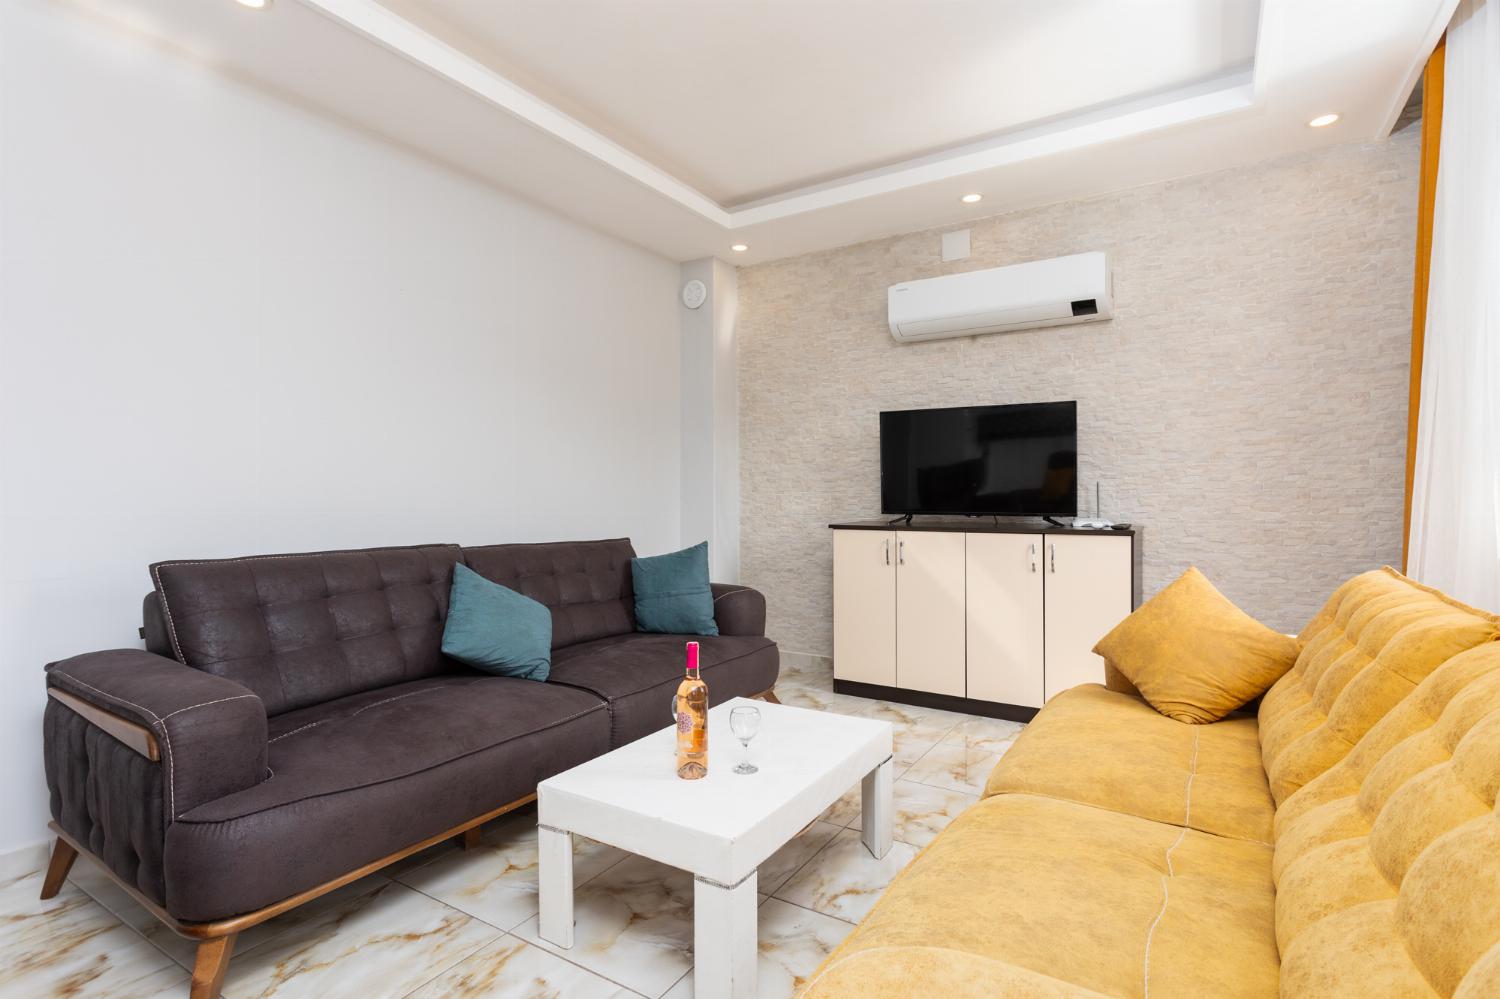 Open-plan living room with sofas, kitchen, A/C, WiFi internet, and satellite TV